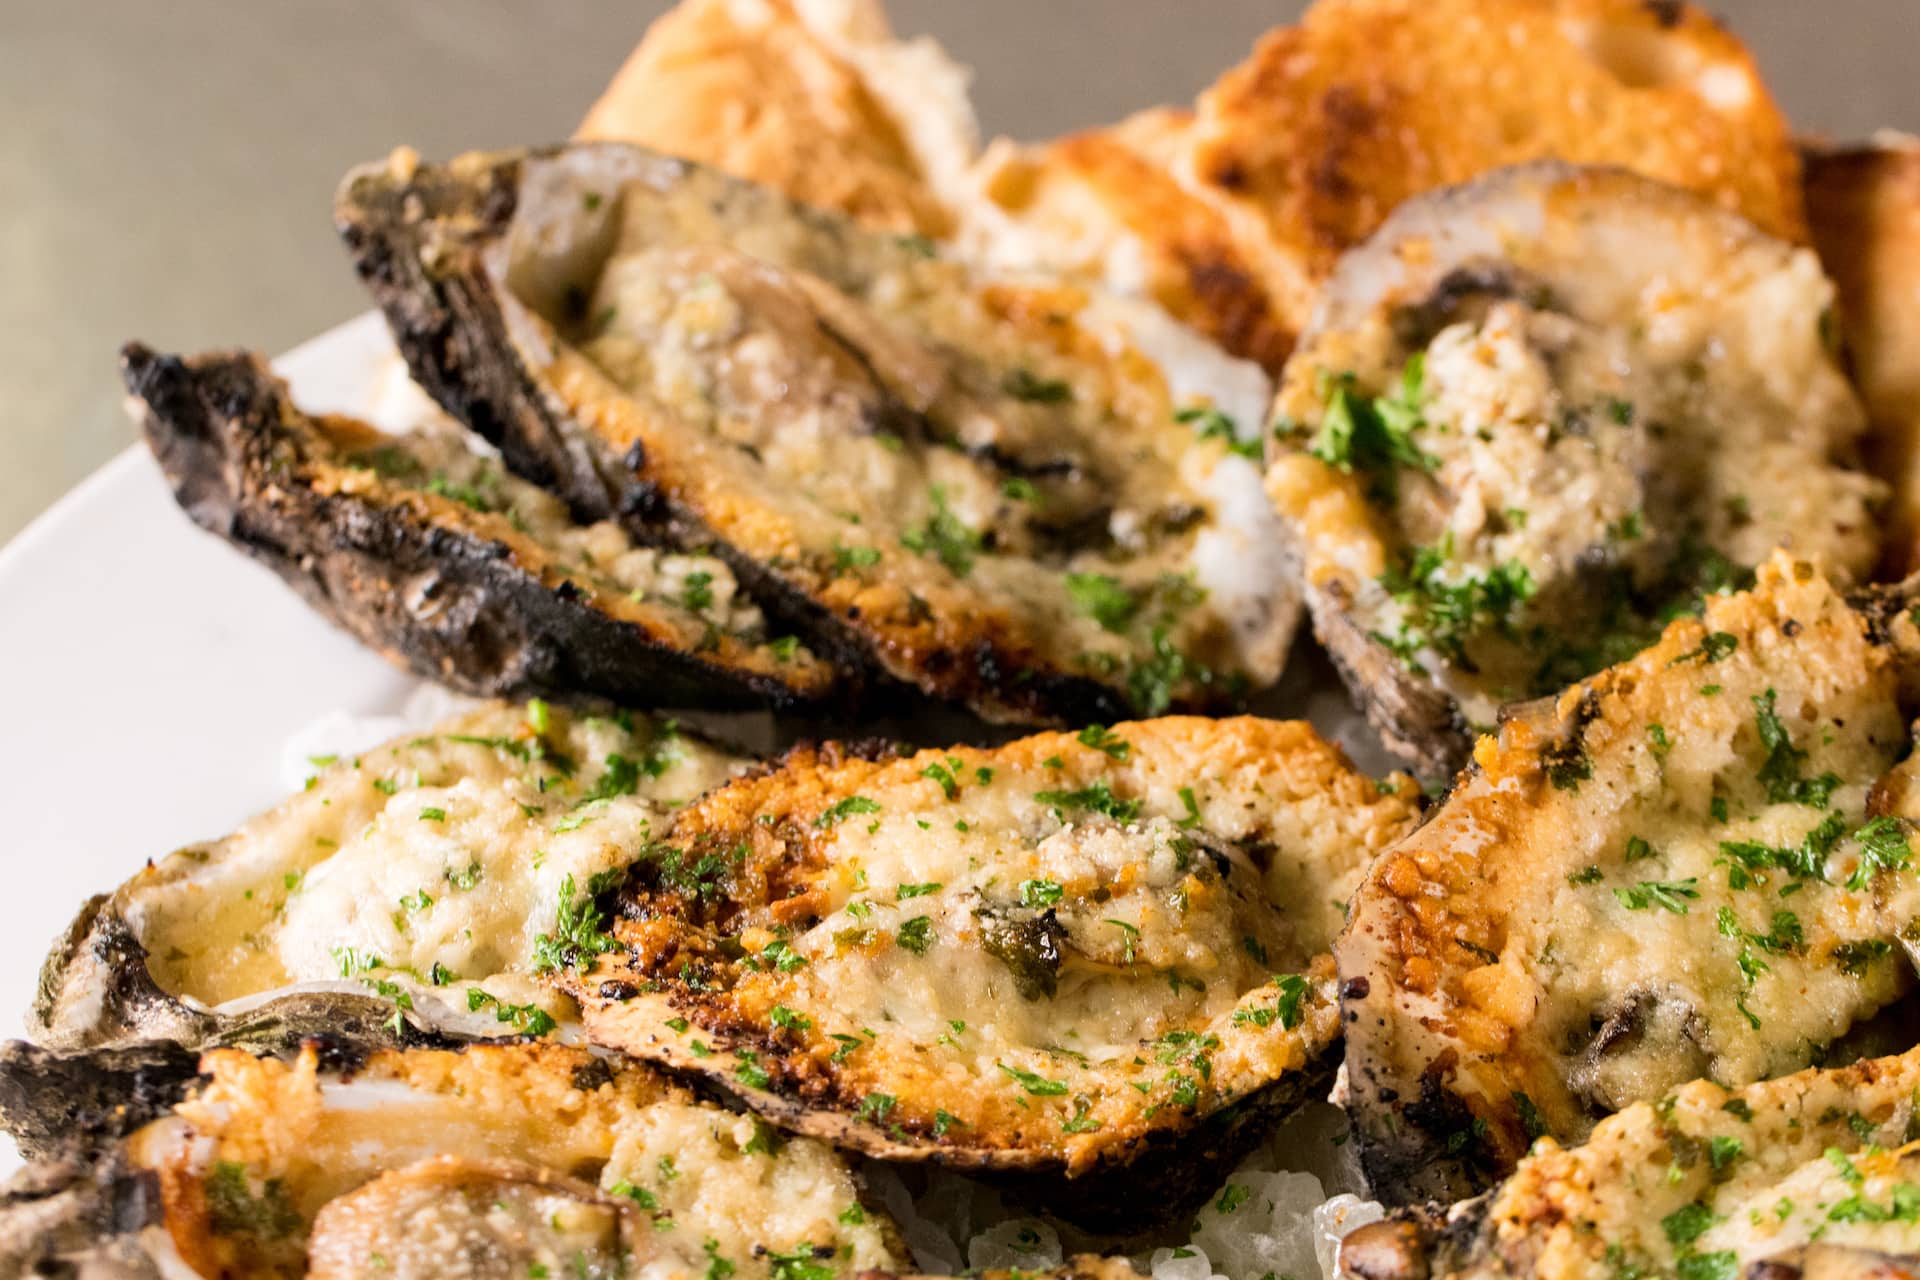 Say Yum Or Yuck to Seafood Dishes to Know How Picky You… Quiz Baked Oysters